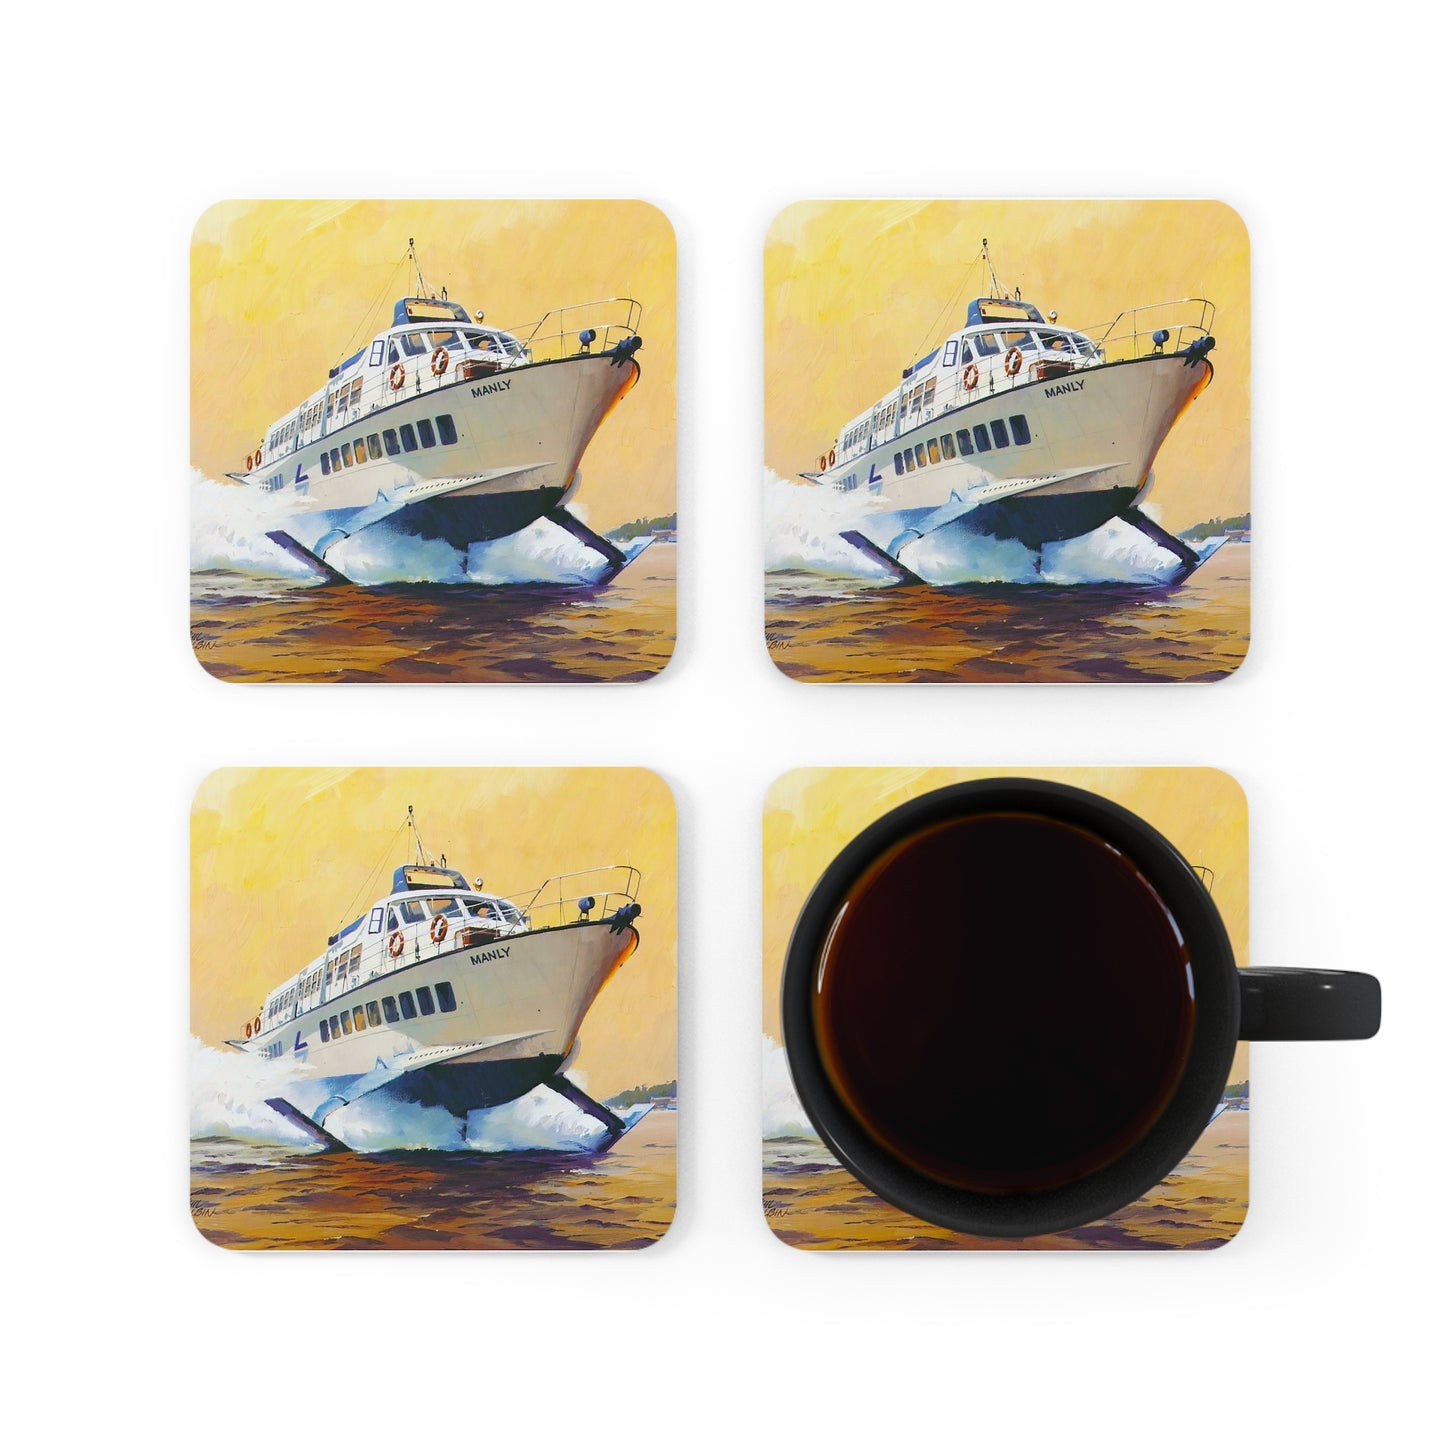 Corkwood Coaster Set customised with painting by Phil Belbin "Manly" Hydrofoil